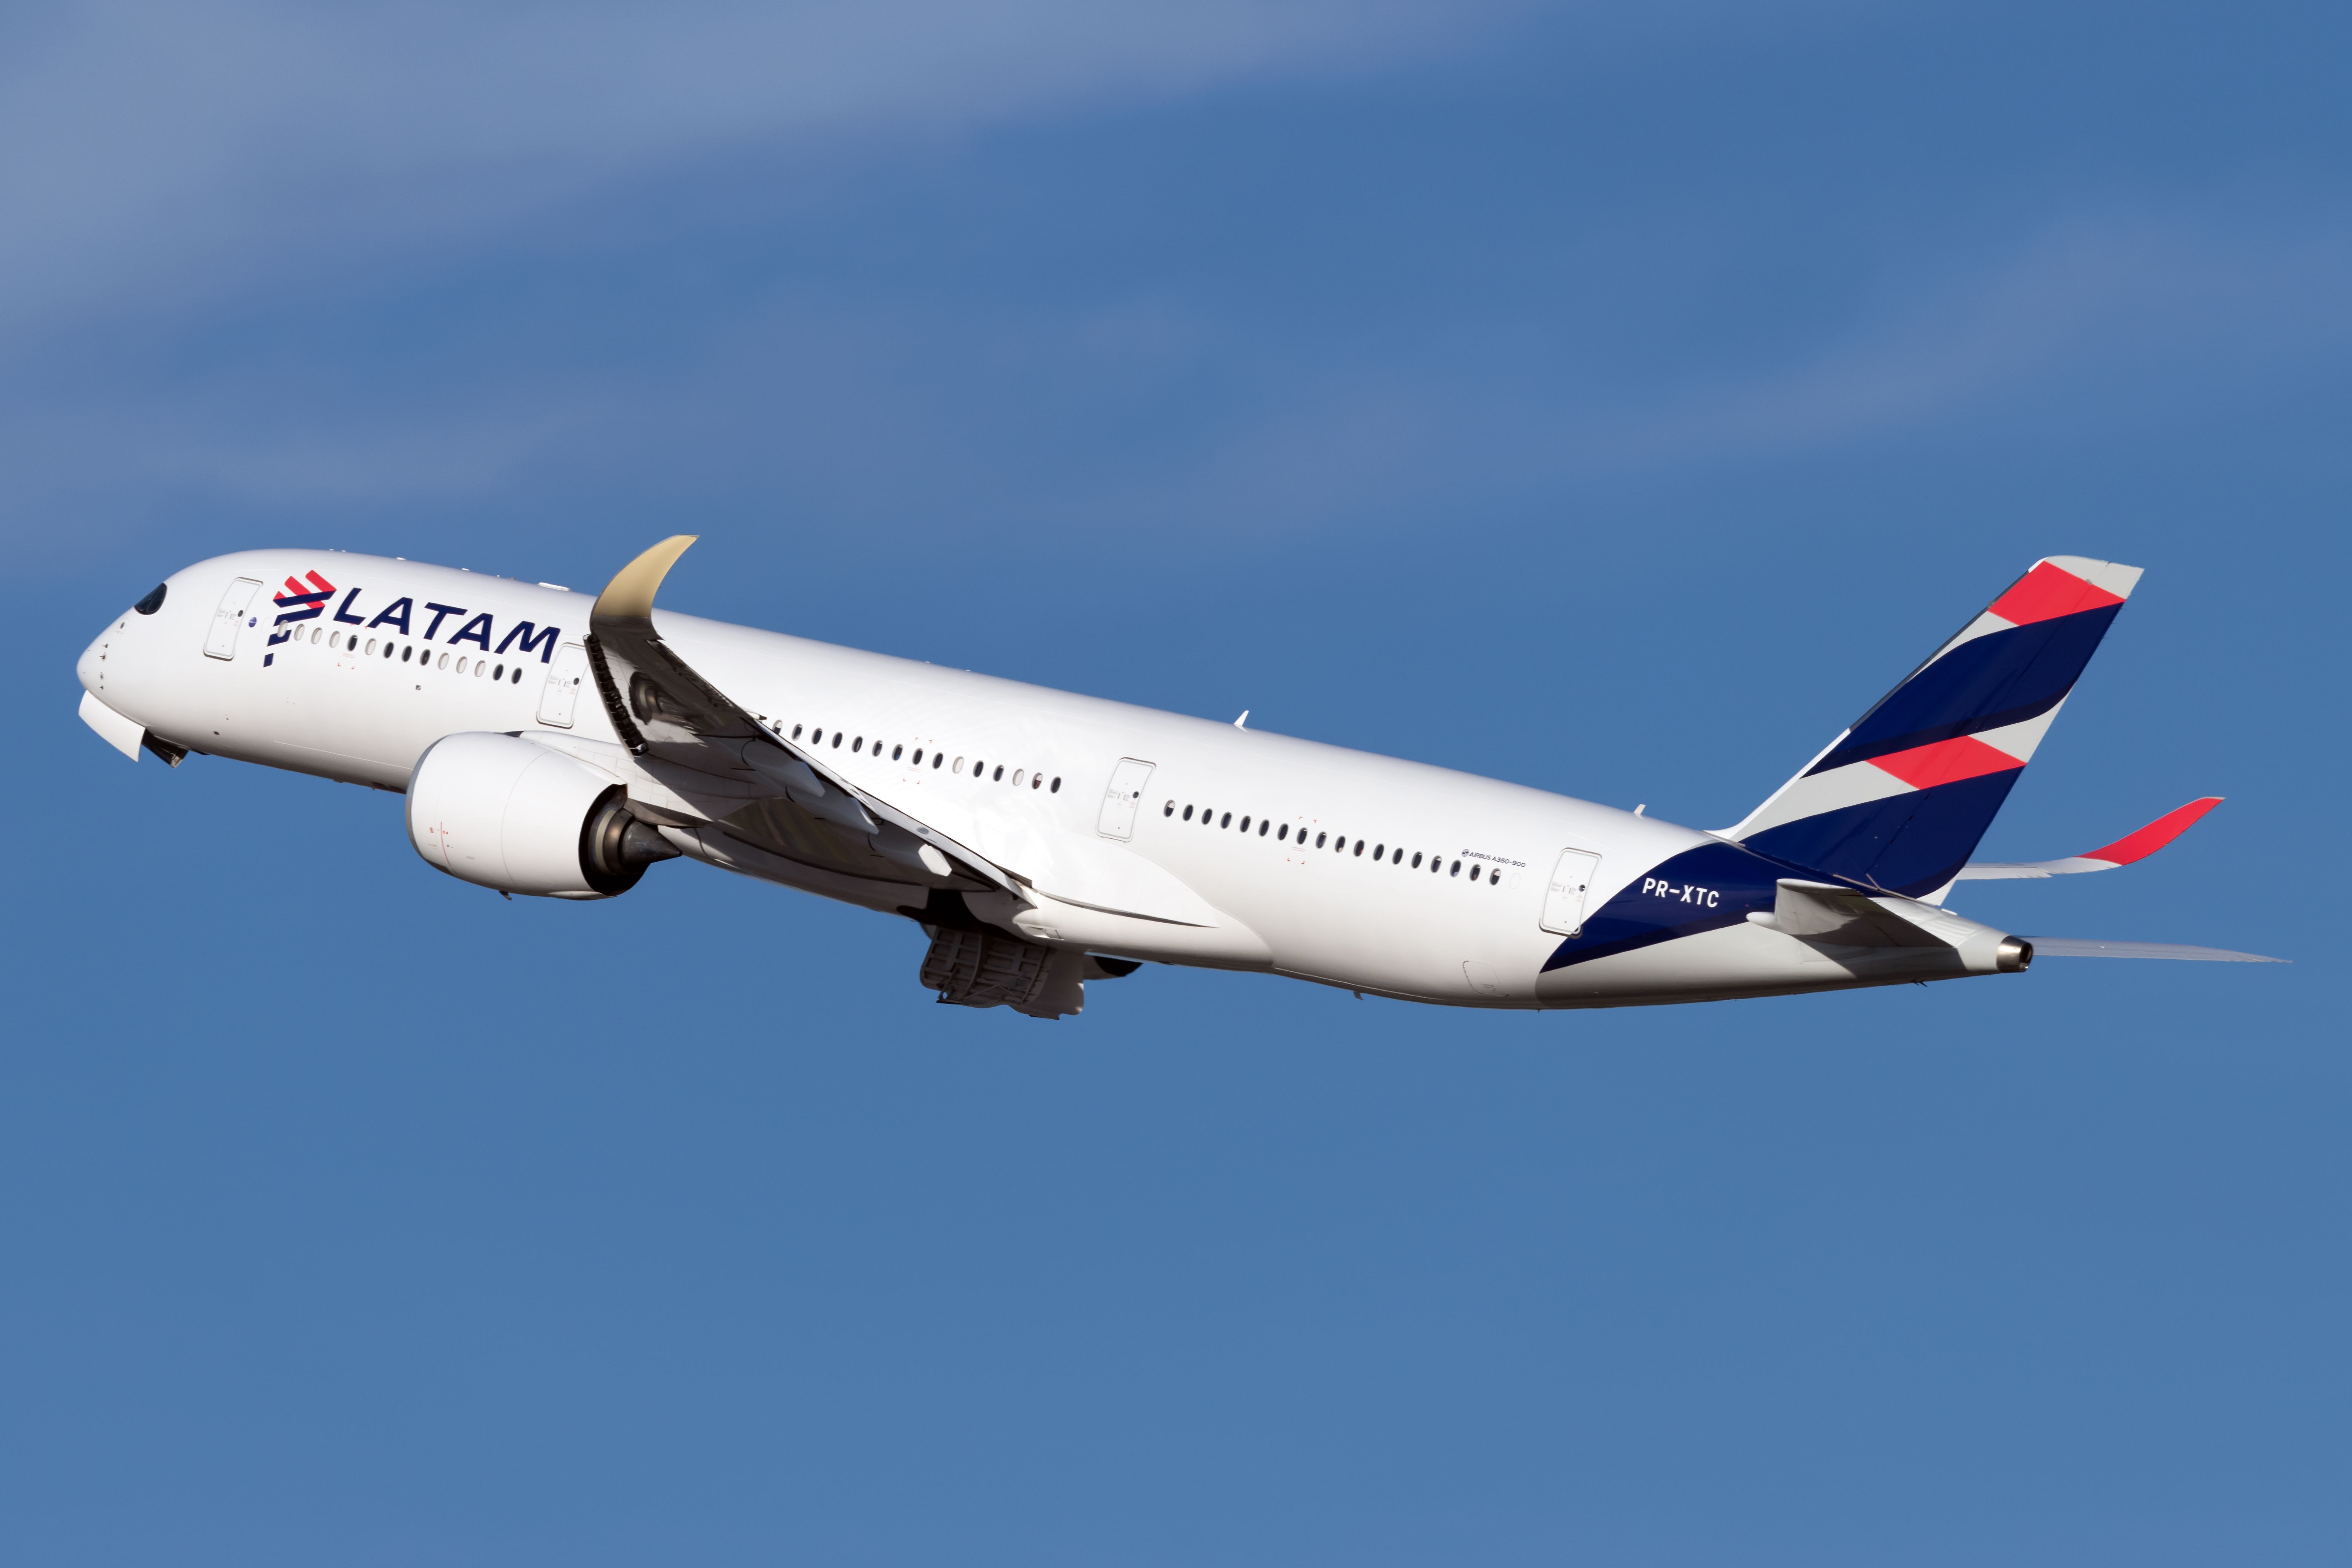 A former LATAM Airlines Airbus A350-941, registration PR-XTC